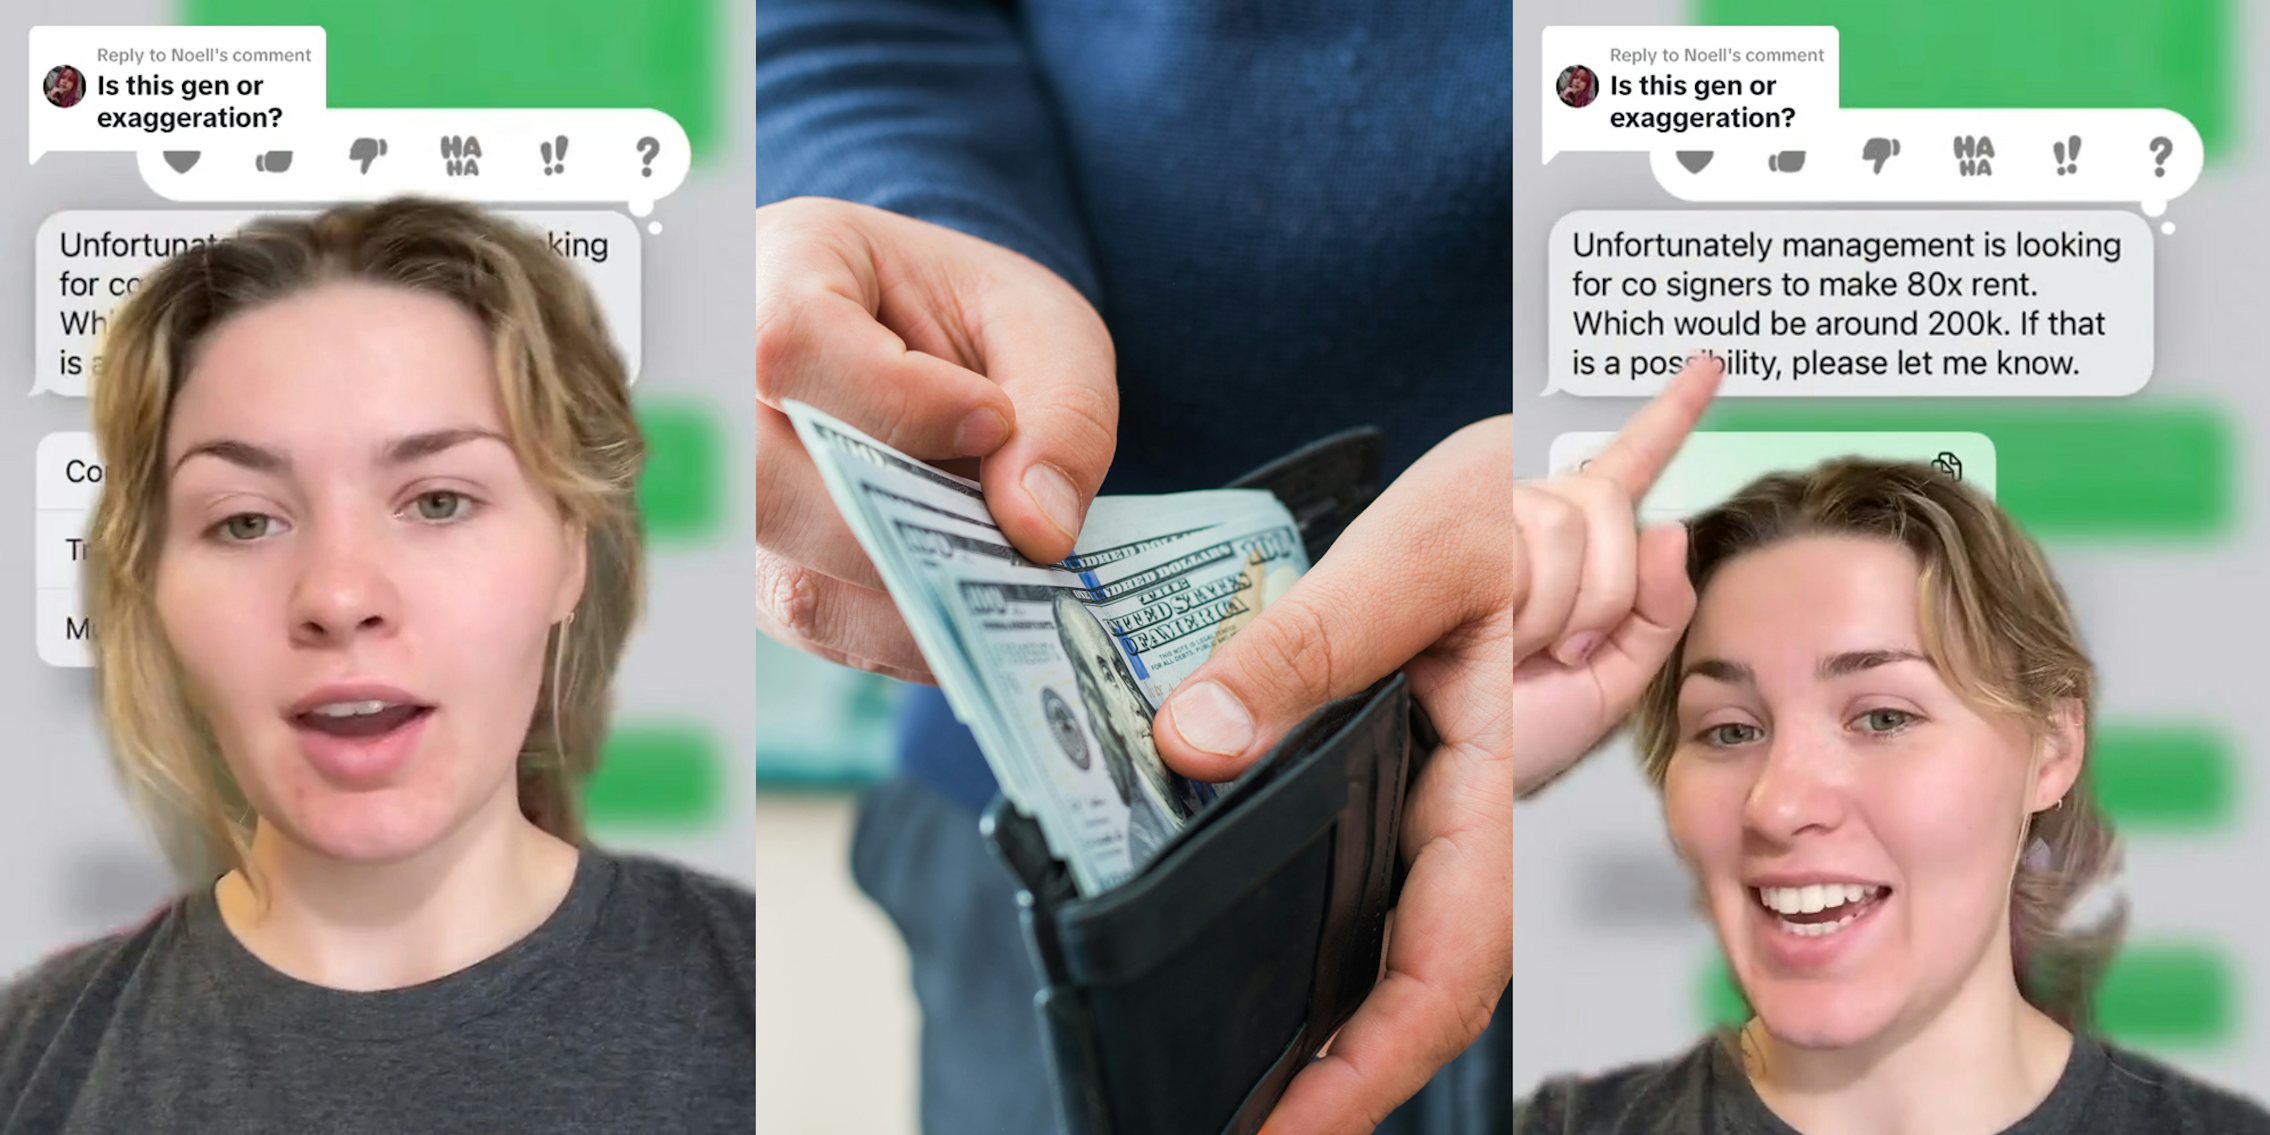 tenant greenscreen TikTok over text messages with caption 'is this gen or exaggeration' (l) person pulling cash from wallet (c) tenant greenscreen TikTok pointing over text messages with caption 'is this gen or exaggeration' (r)